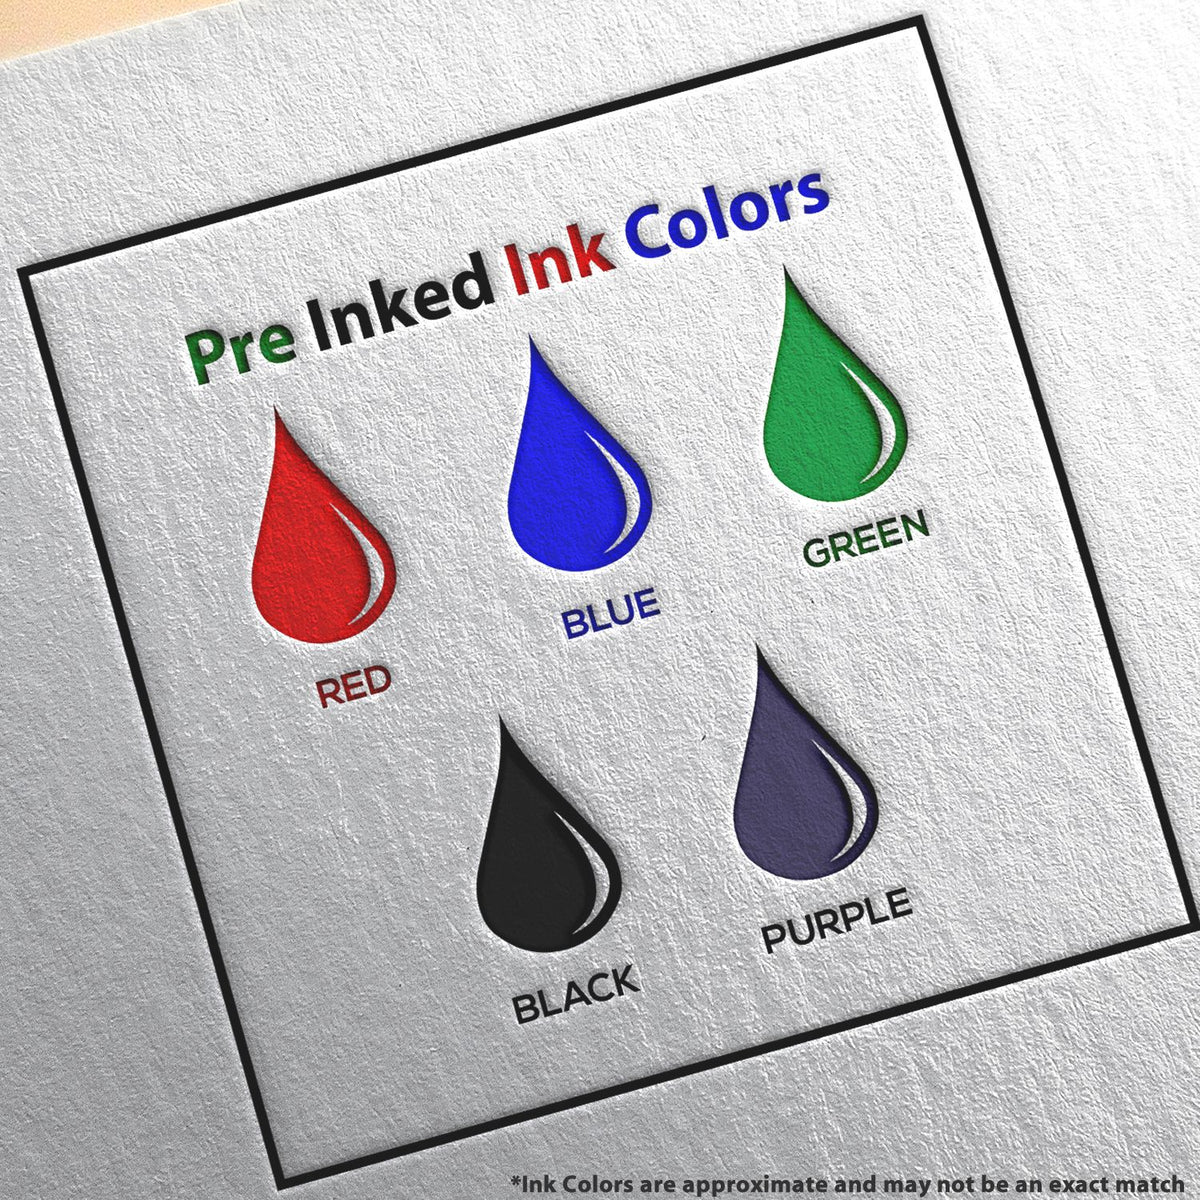 A picture showing the different ink colors or hues available for the Premium MaxLight Pre-Inked Rhode Island Engineering Stamp product.